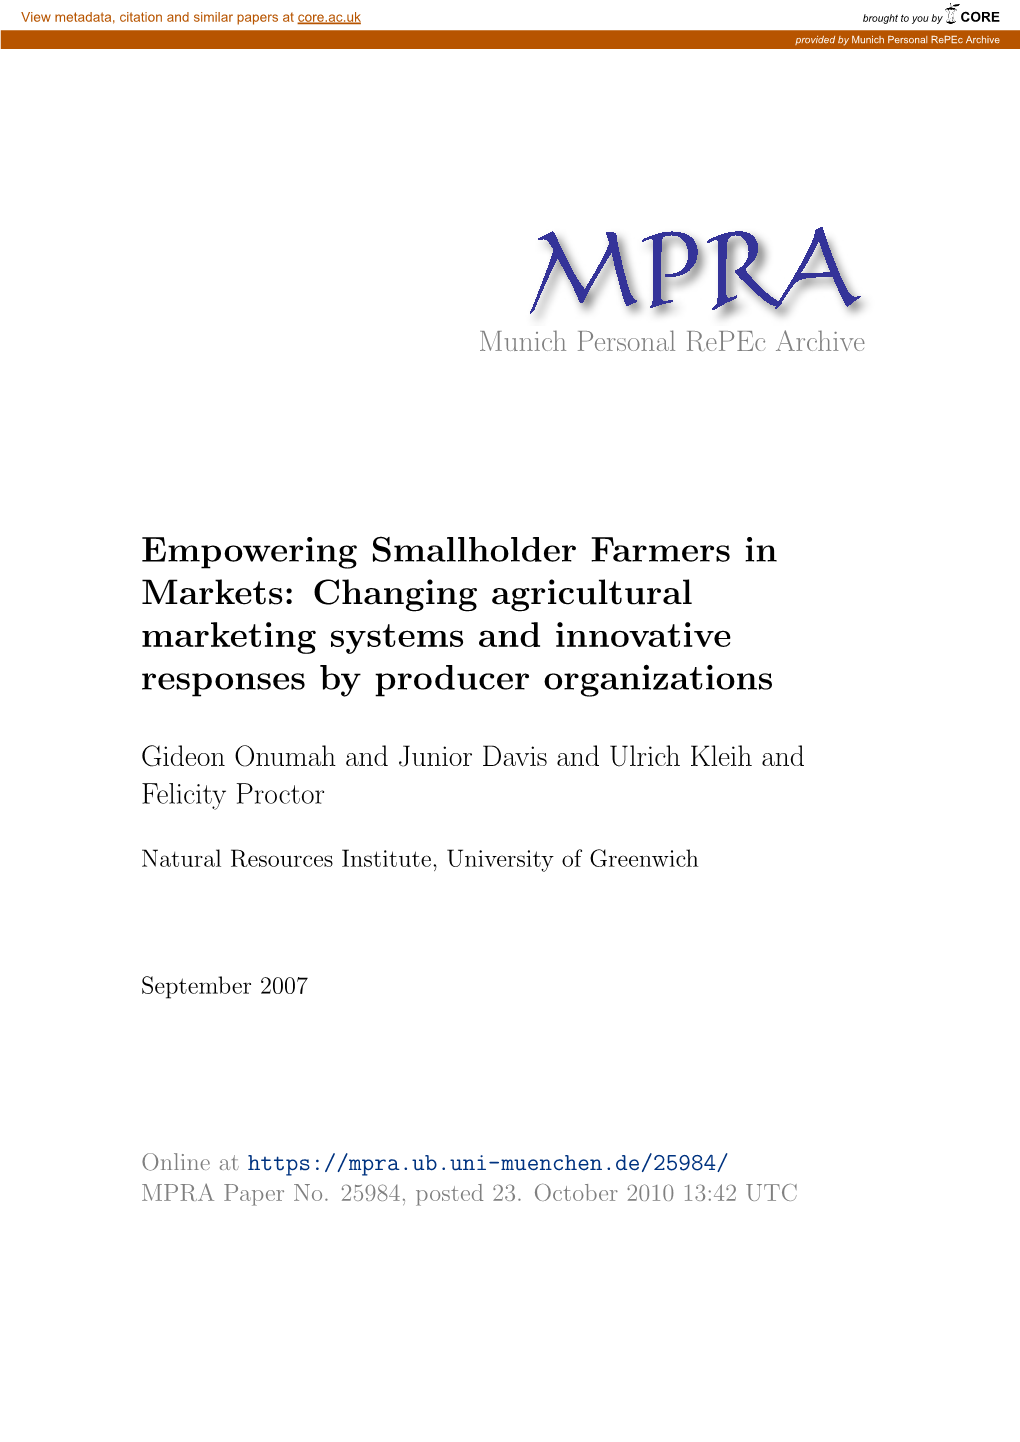 Empowering Smallholder Farmers in Markets: Changing Agricultural Marketing Systems and Innovative Responses by Producer Organizations